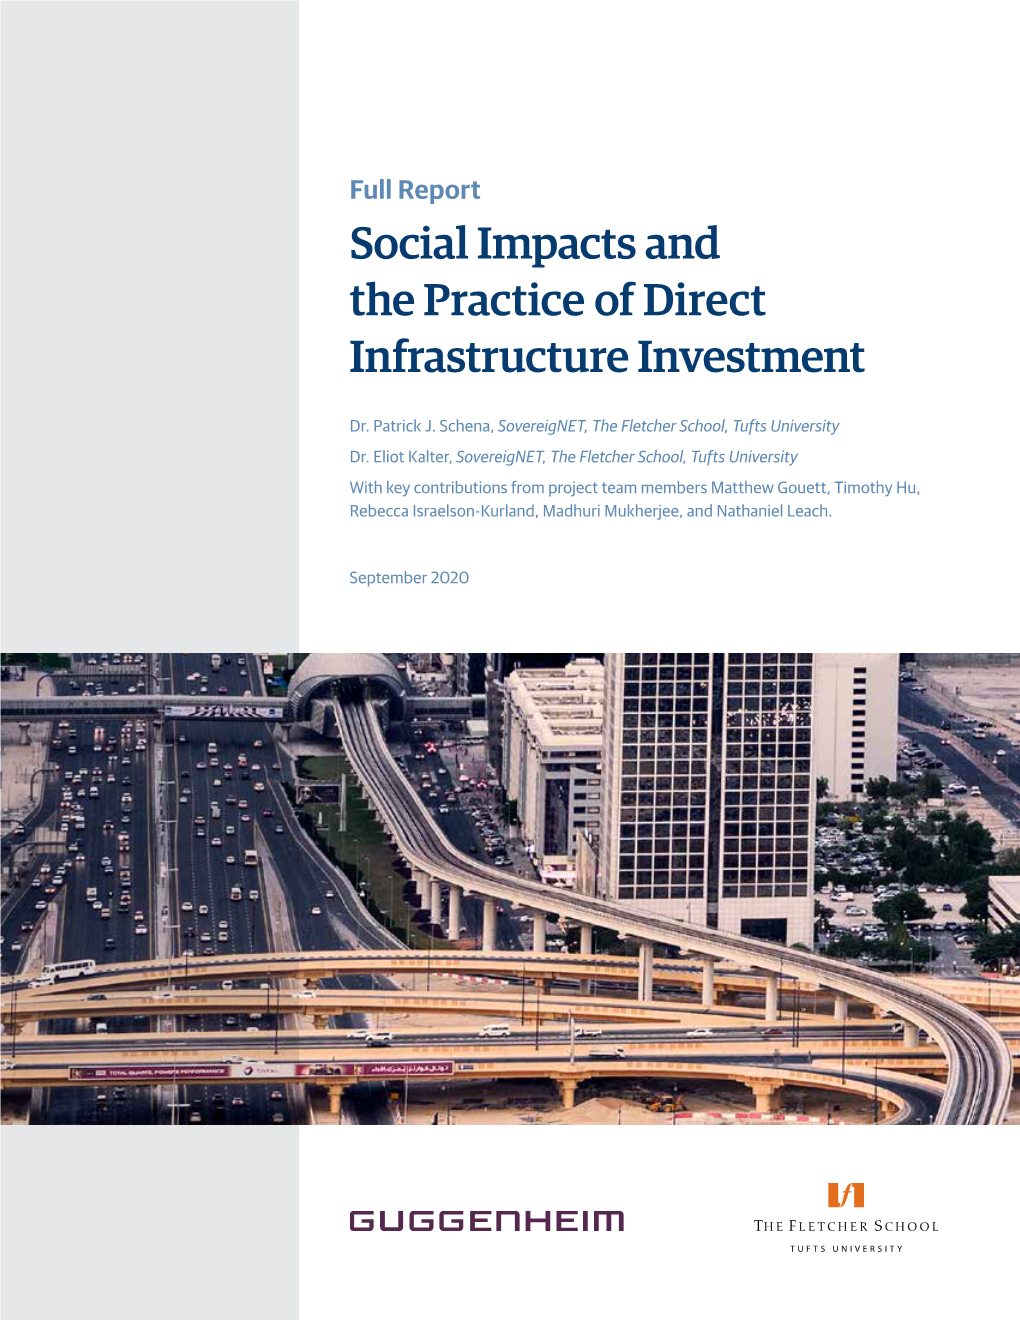 Social Impacts and the Practice of Direct Infrastructure Investment